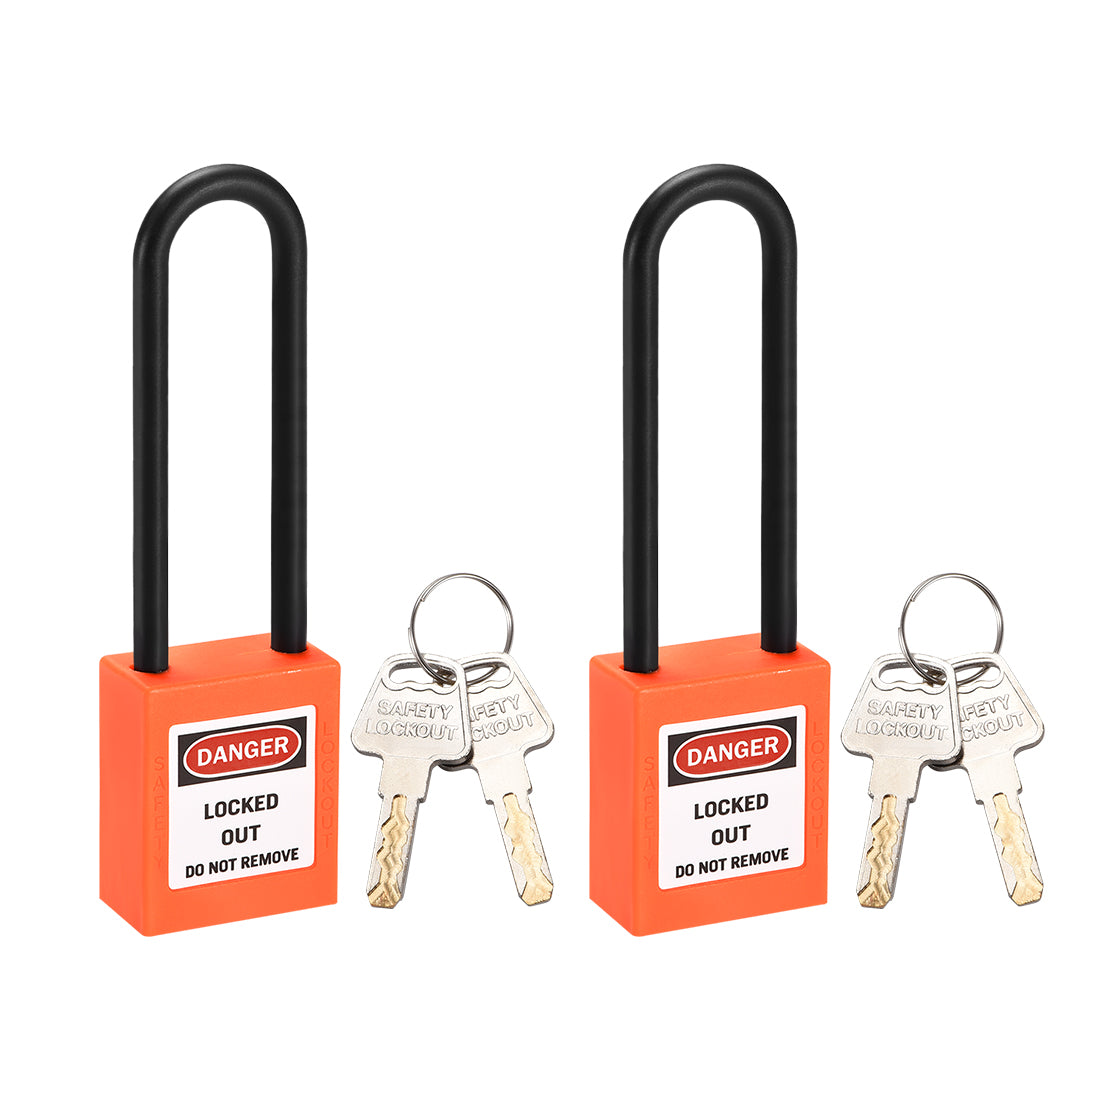 uxcell Uxcell Lockout Tagout Safety Padlock 76mm Nylon Shackle Keyed Different Orange 2Pcs